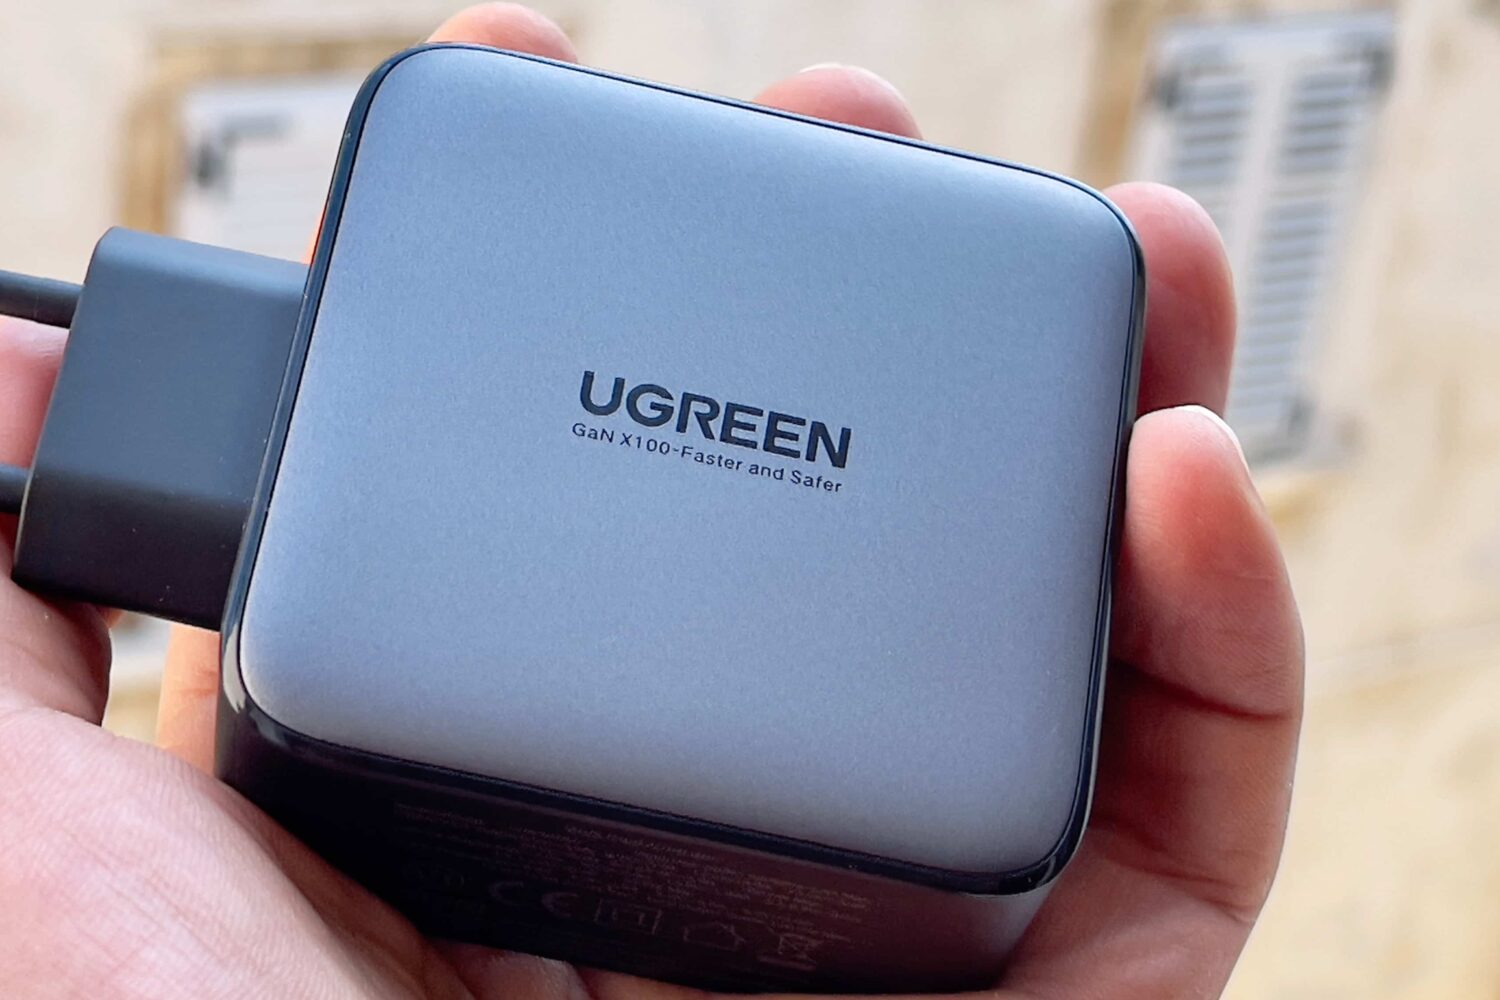 A male hand holding Ugreen's 100-watt Nexus power adapter, showing a Ugreen logo with the tagline "GaN X100-Faster and Safer" printed on the back of the casing